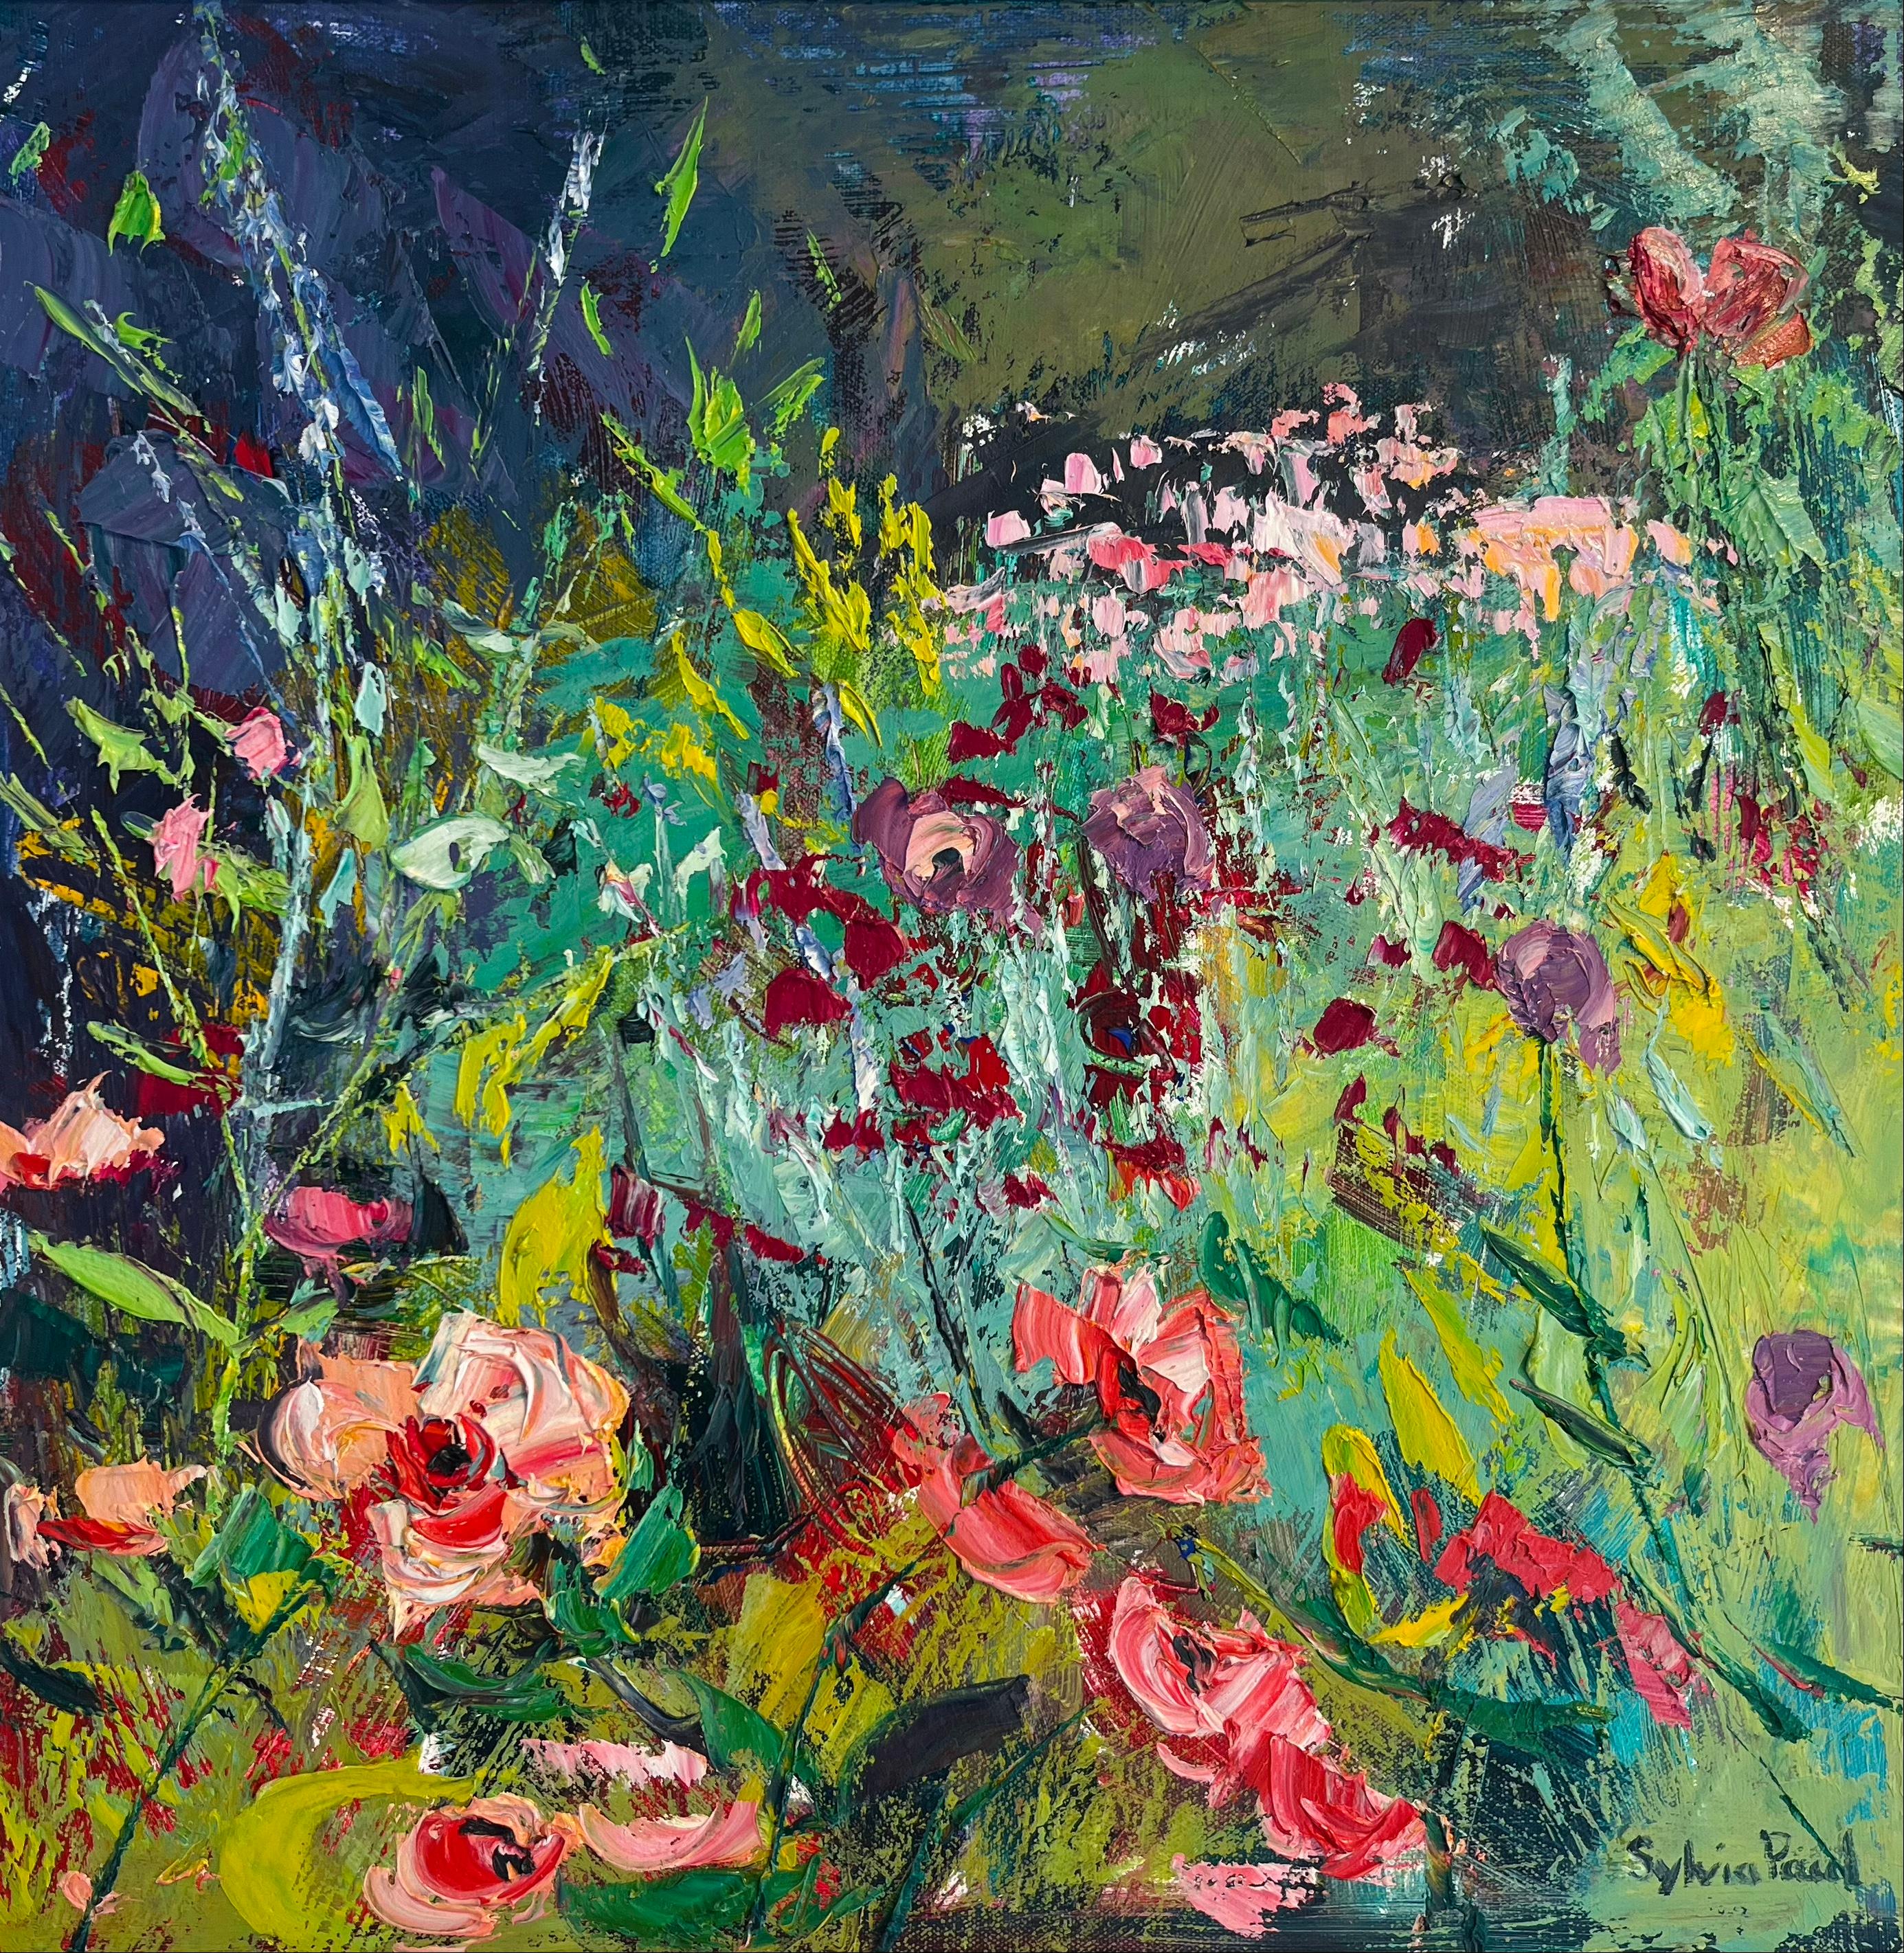 Pink Poppies in the Garden - original abstract still life painting-contemporary